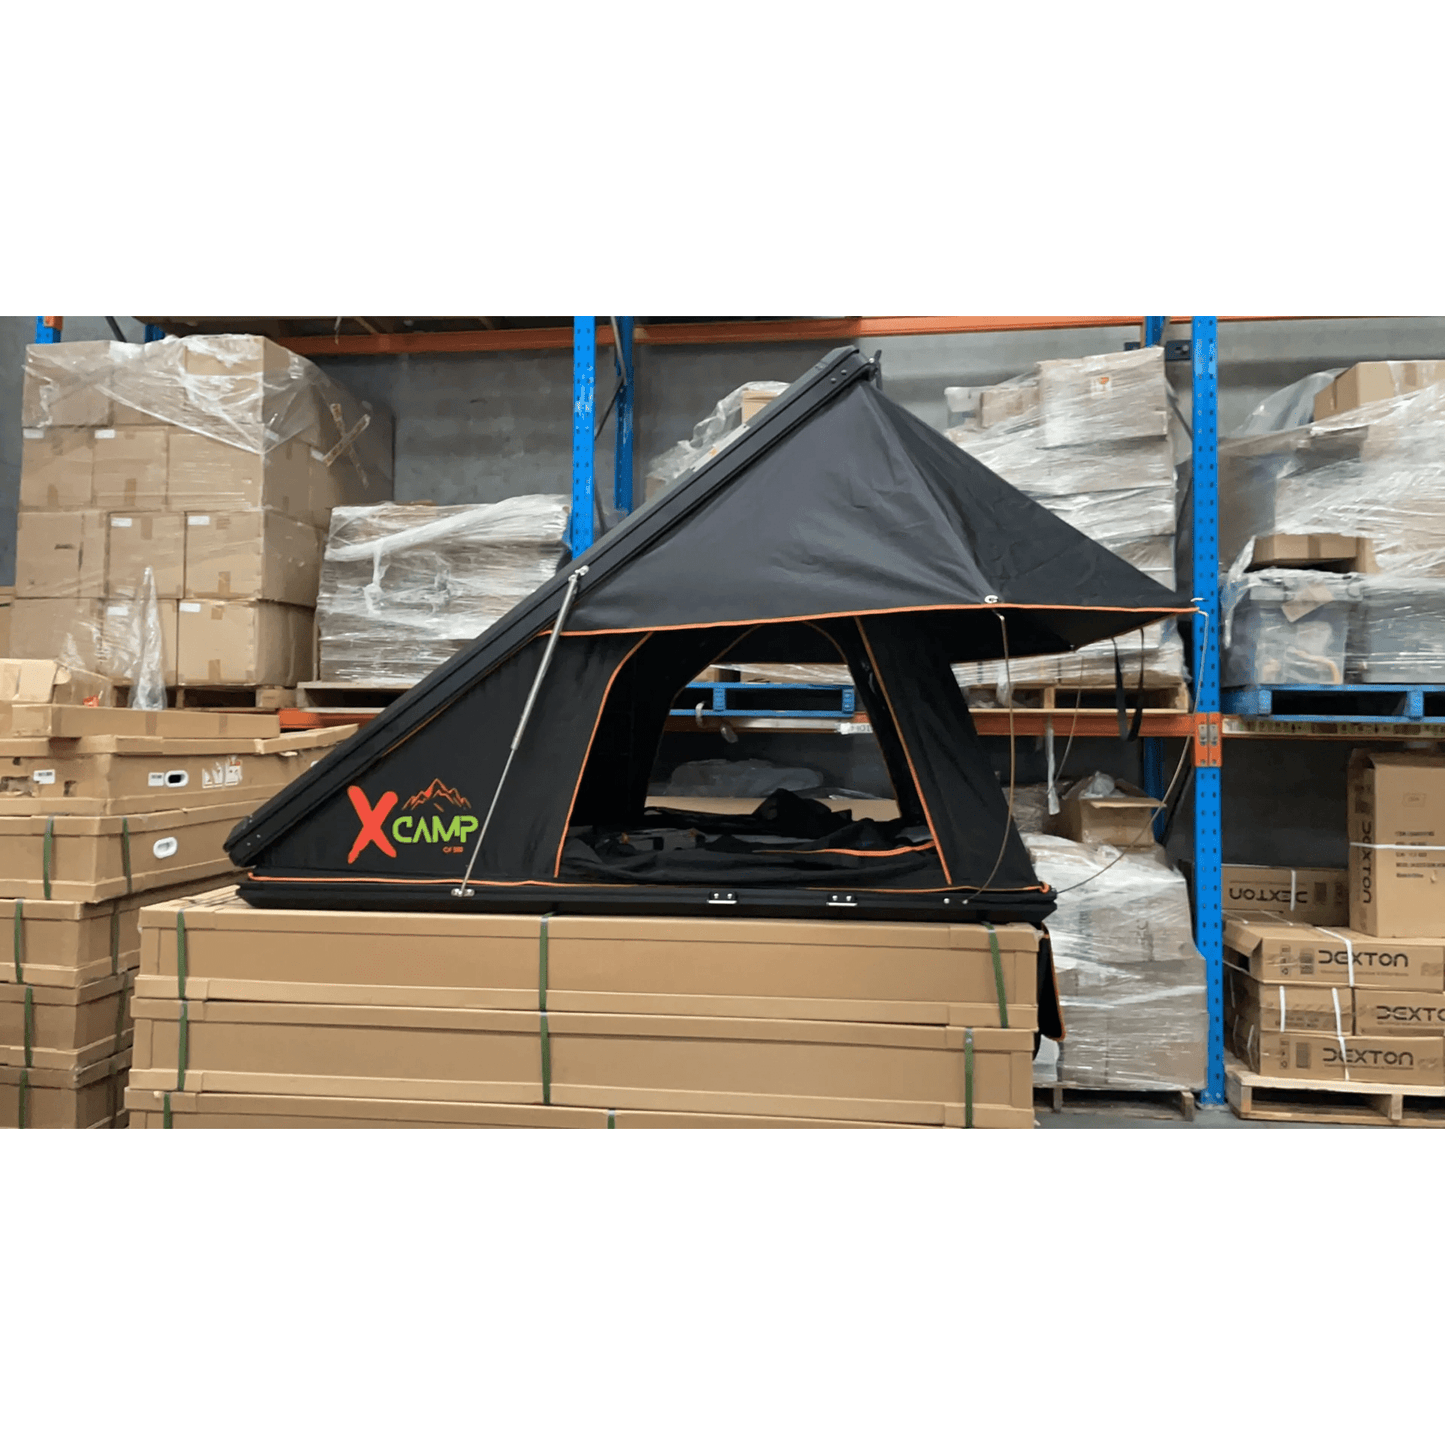 Xcamp cx500 Hard Shell Rooftop- Black